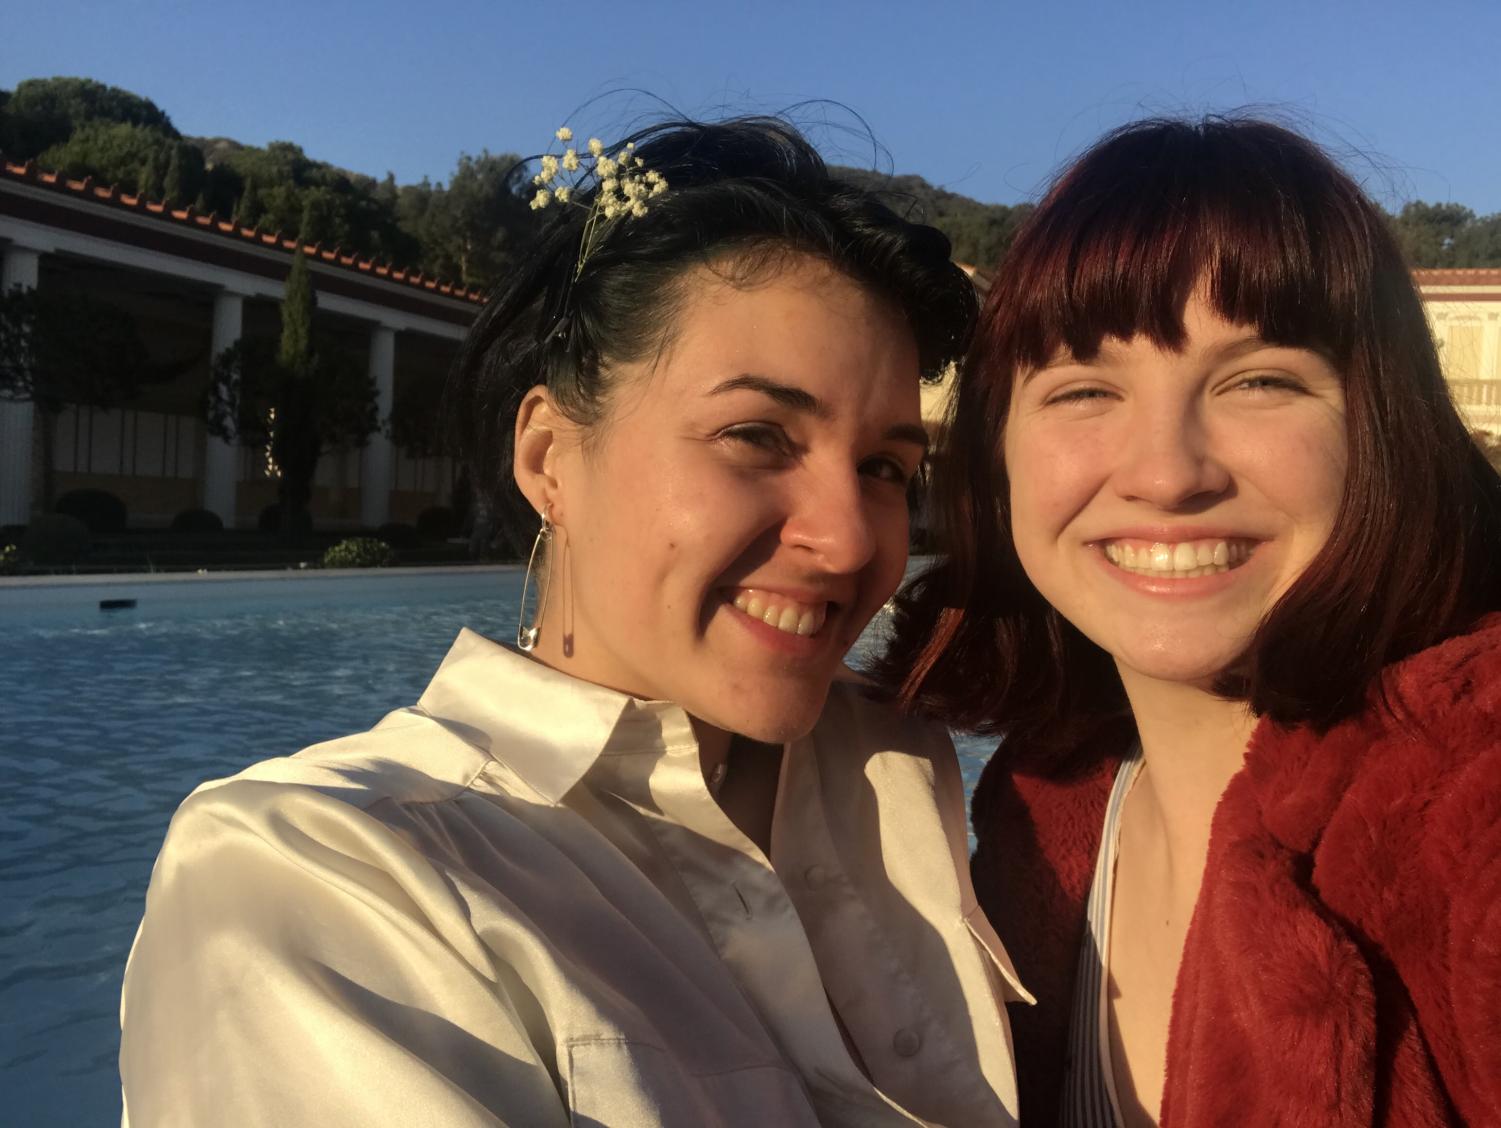 Lucy Marx (right) and her girlfriend Liliana Johnston at the Getty Villa in Los Angeles, Calif.